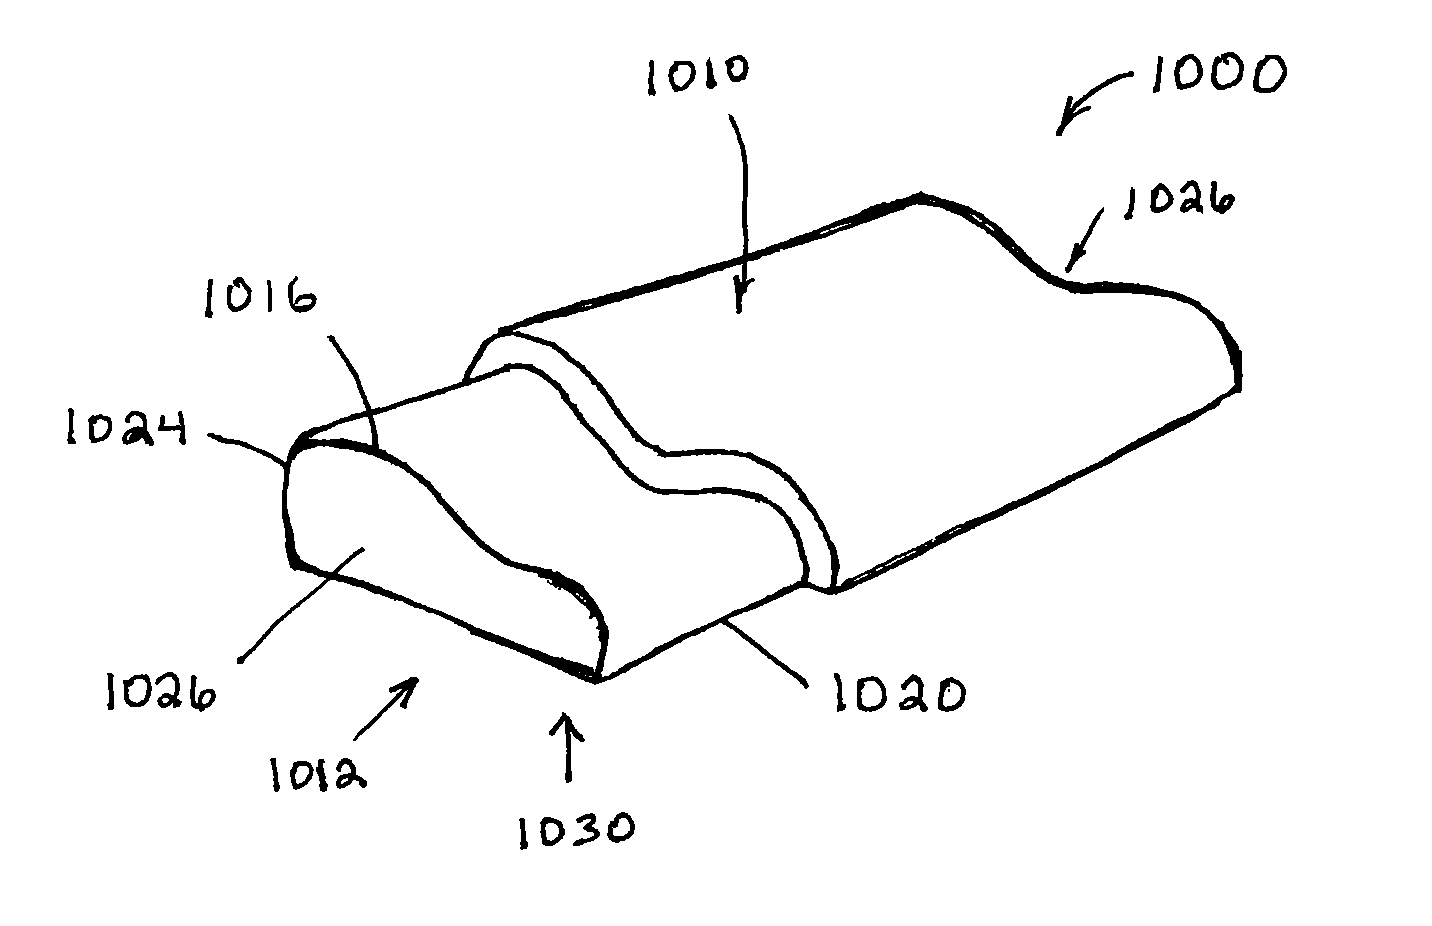 Visco-elastic body support and method of manufacturing the same